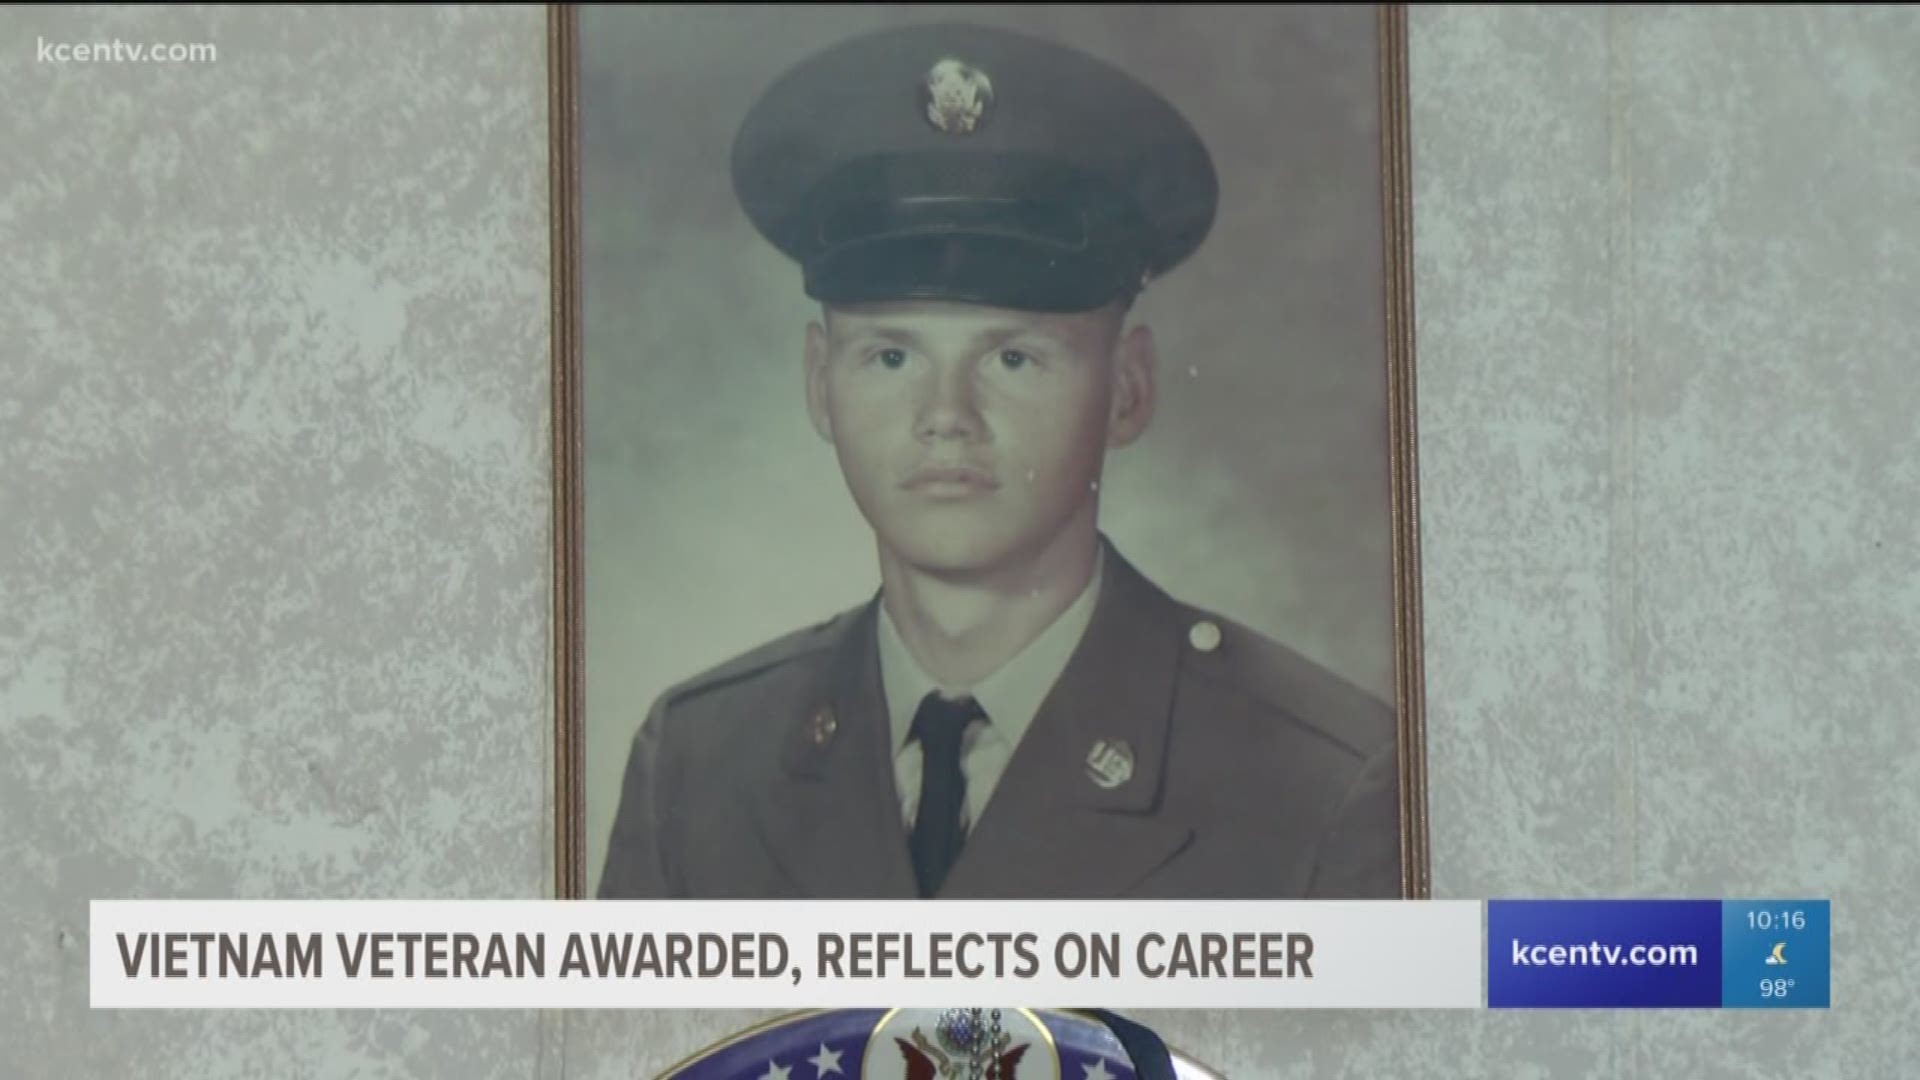 The Vietnam veteran reflects on his career.